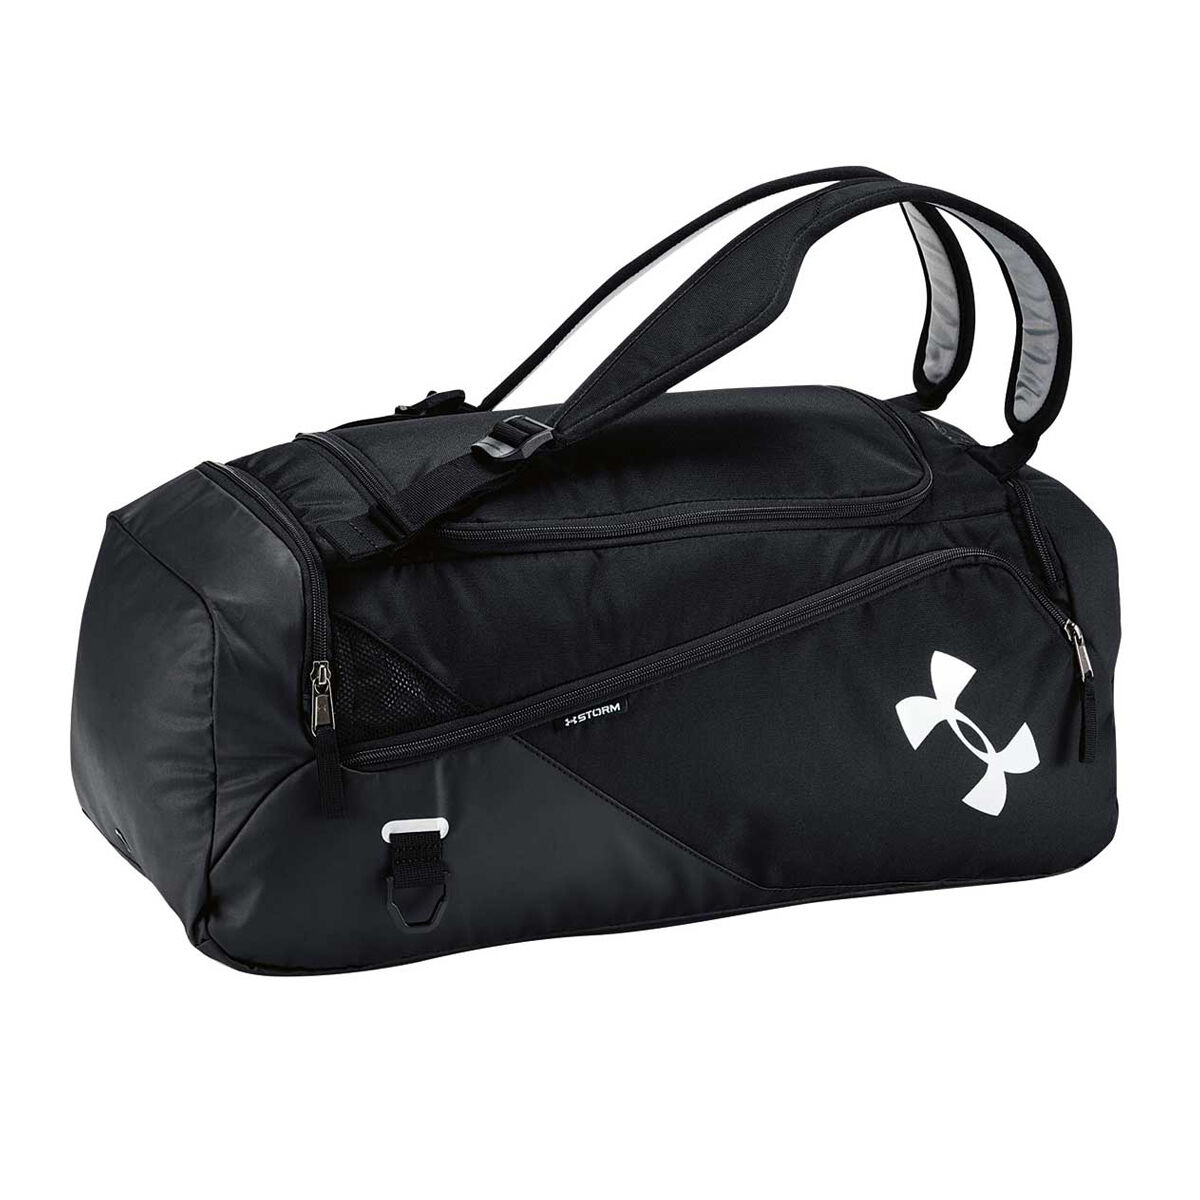 contain 4.0 backpack duffle